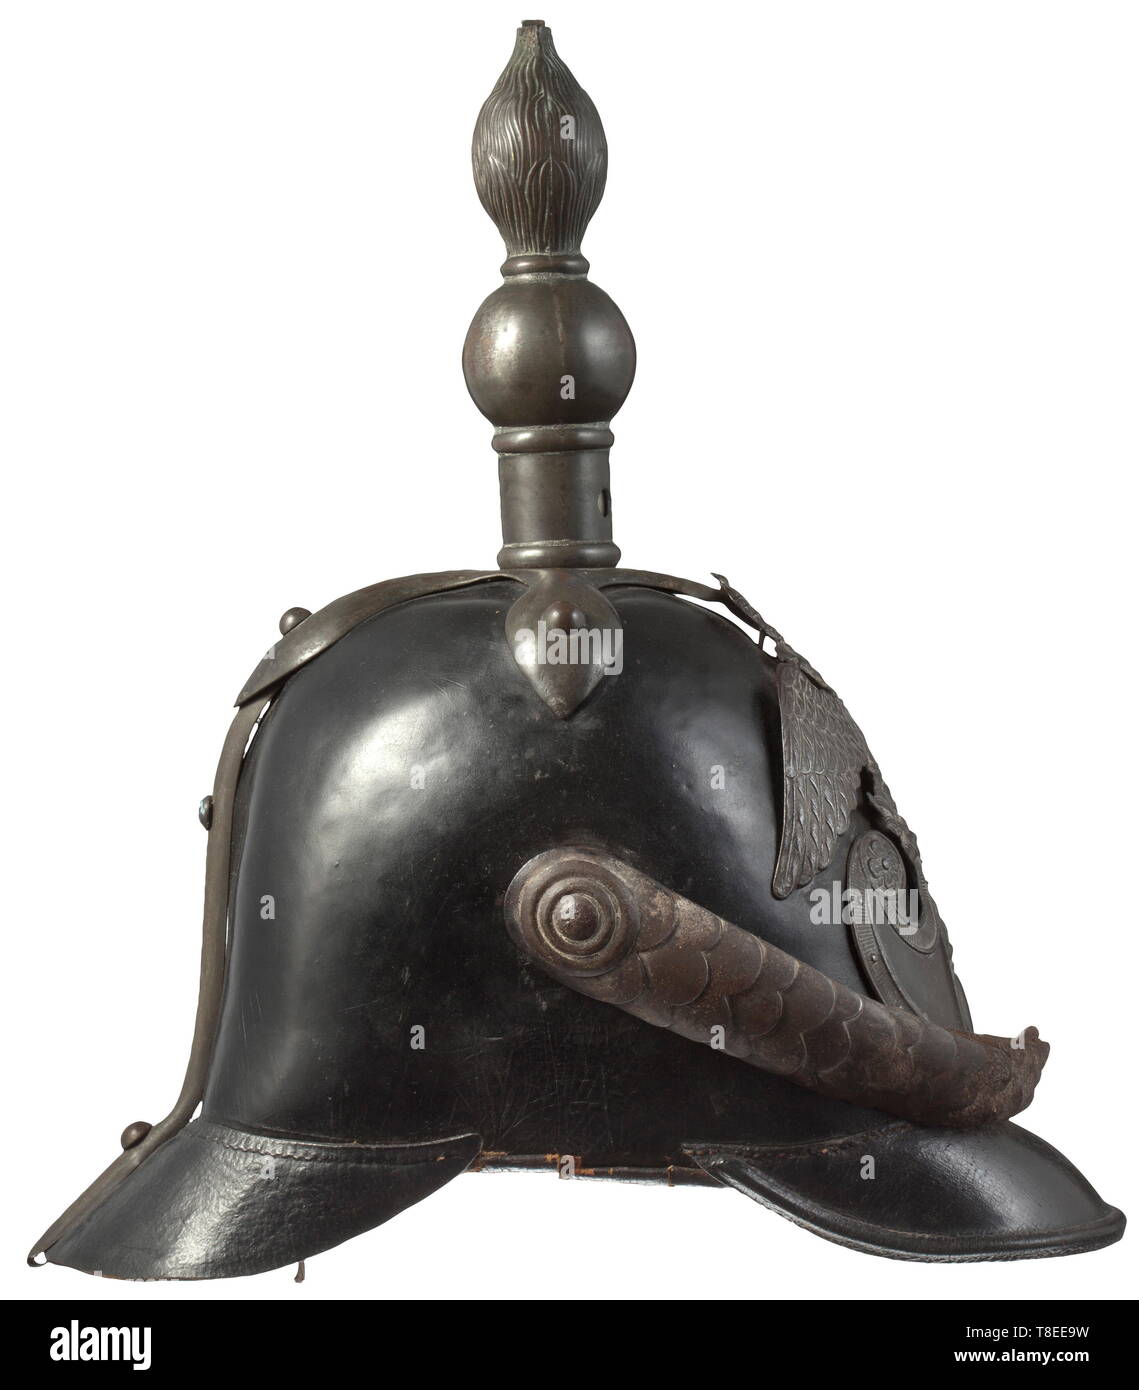 A helmet M 1844 for enlisted men of the Finnish Grenadier Regiment, Russia, circa 1850 Black leather skull with zinc plated brass fittings. Applied iron frontal plate with Finnish lion on a double-headed eagle. Curved chin scales (with rust stains), the inner straps repaired. Leather sweatband and linen liner. Height 33 cm. Signs of age. Very rare. historic, historical, 19th century, Additional-Rights-Clearance-Info-Not-Available Stock Photo